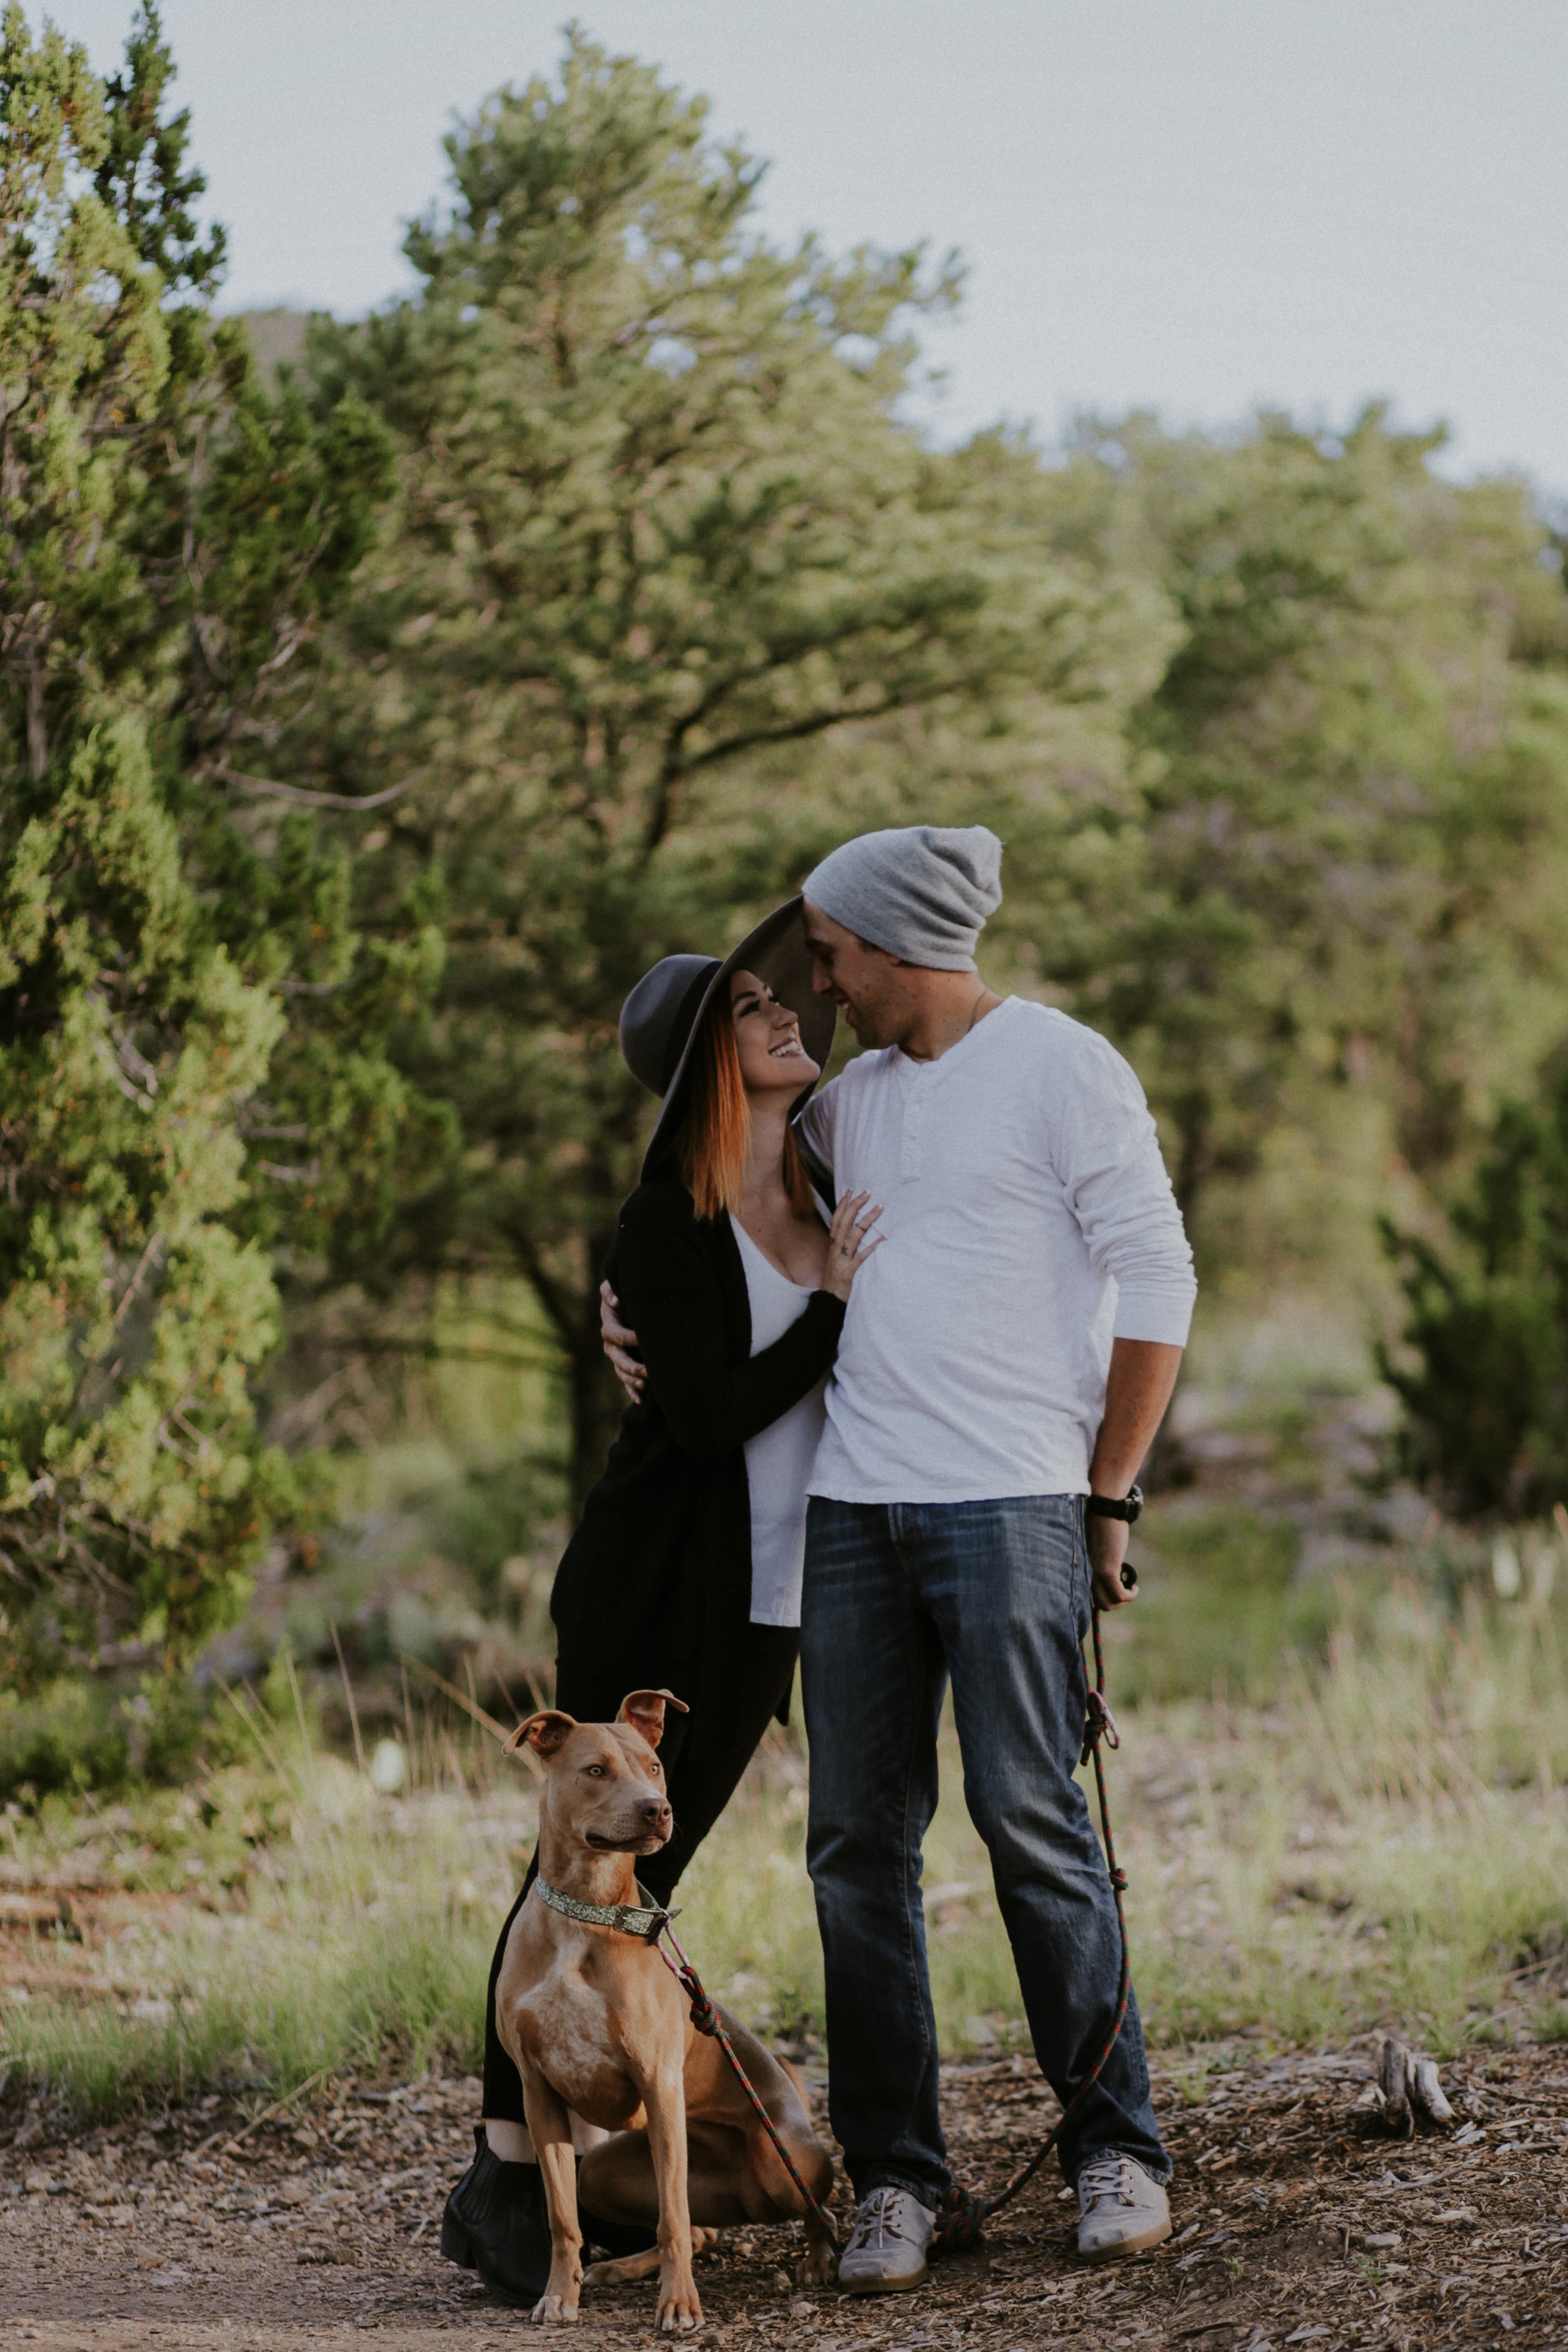  Kymbrye and Chris brought their pups, Myridian and Bandit along for their shoot and they are seriously the sweetest model dogs ever! They all looked so picture perfect together for some insanely beautiful family photos at Carlitos Springs in Cedar C